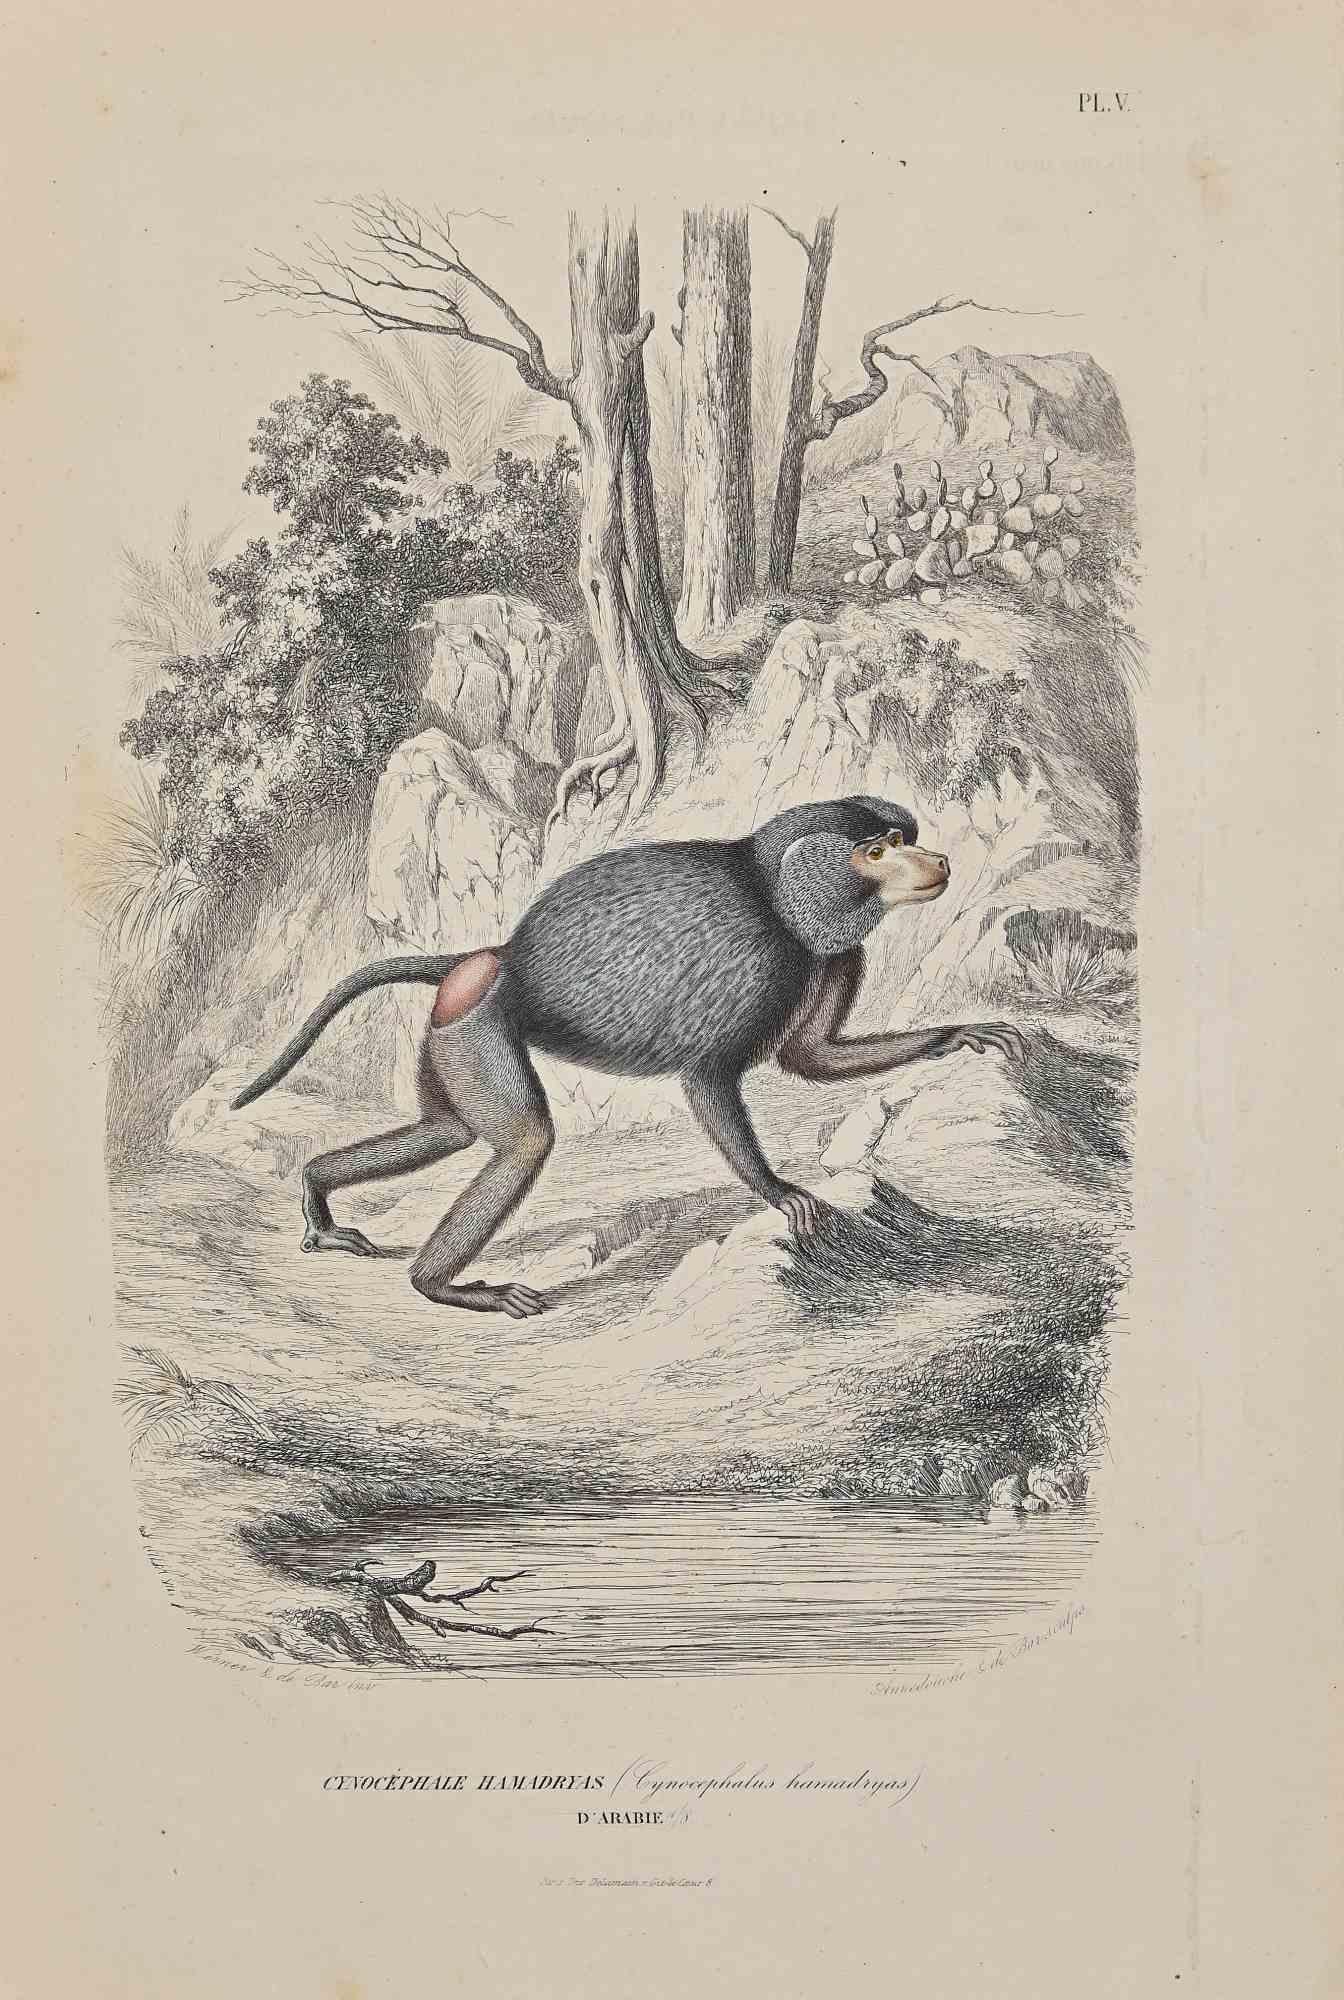 Hamadryas Baboon - Original Lithograph by Paul Gervais - 1854